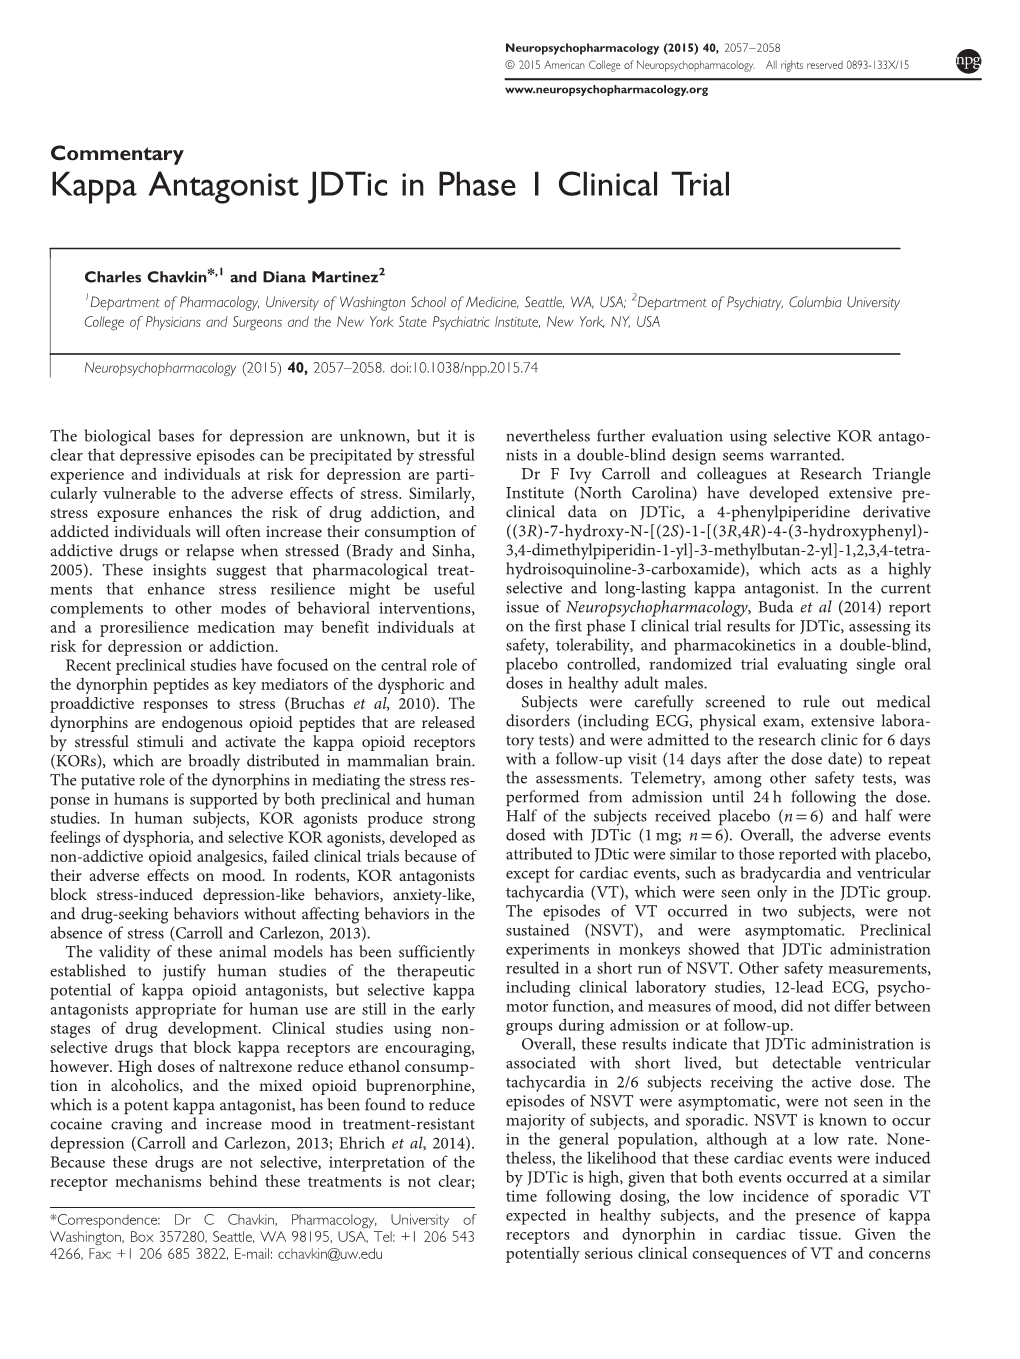 Kappa Antagonist Jdtic in Phase 1 Clinical Trial